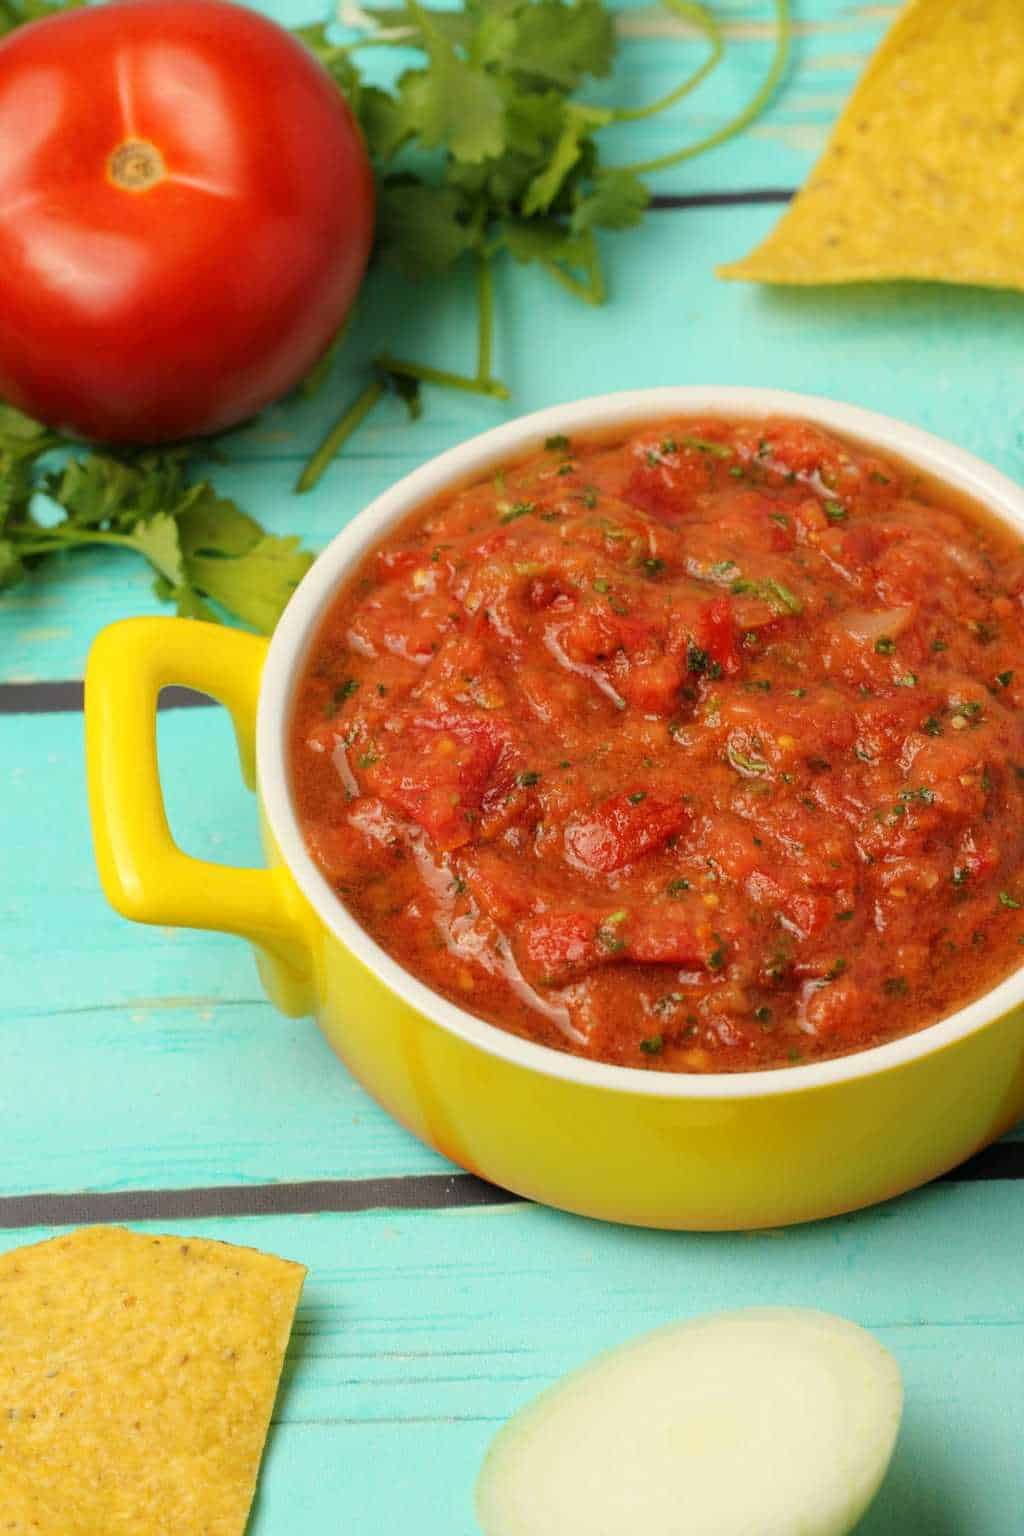 Homemade salsa in a yellow and white glass dish. 